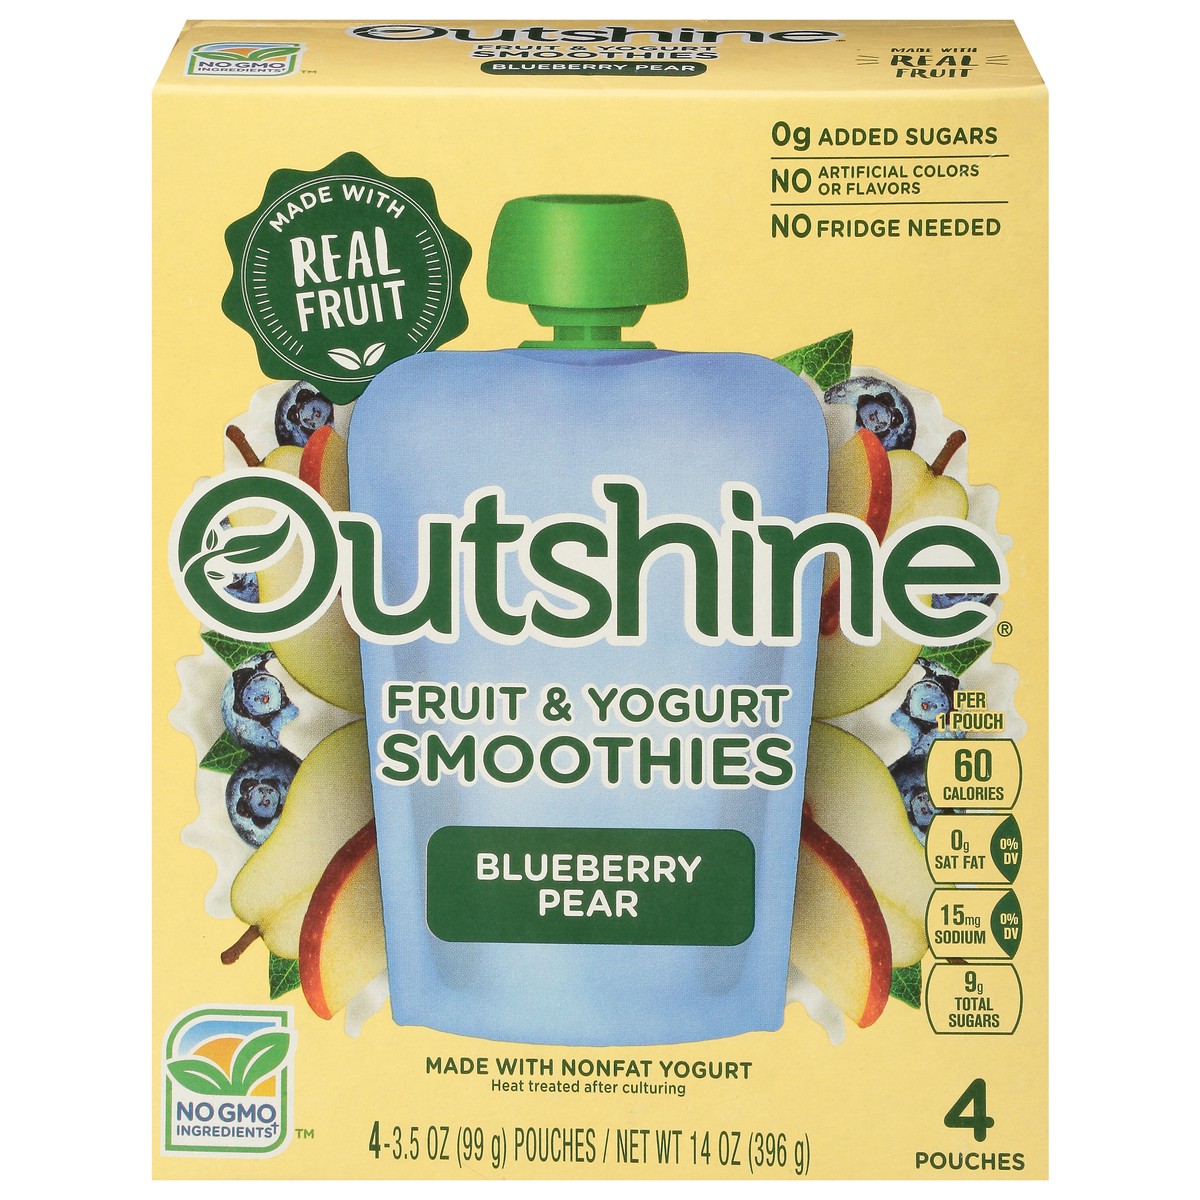 slide 7 of 11, Outshine Fruit & Yogurt Blueberry Pear Smoothies 4 - 3.5 oz Pouches, 4 ct